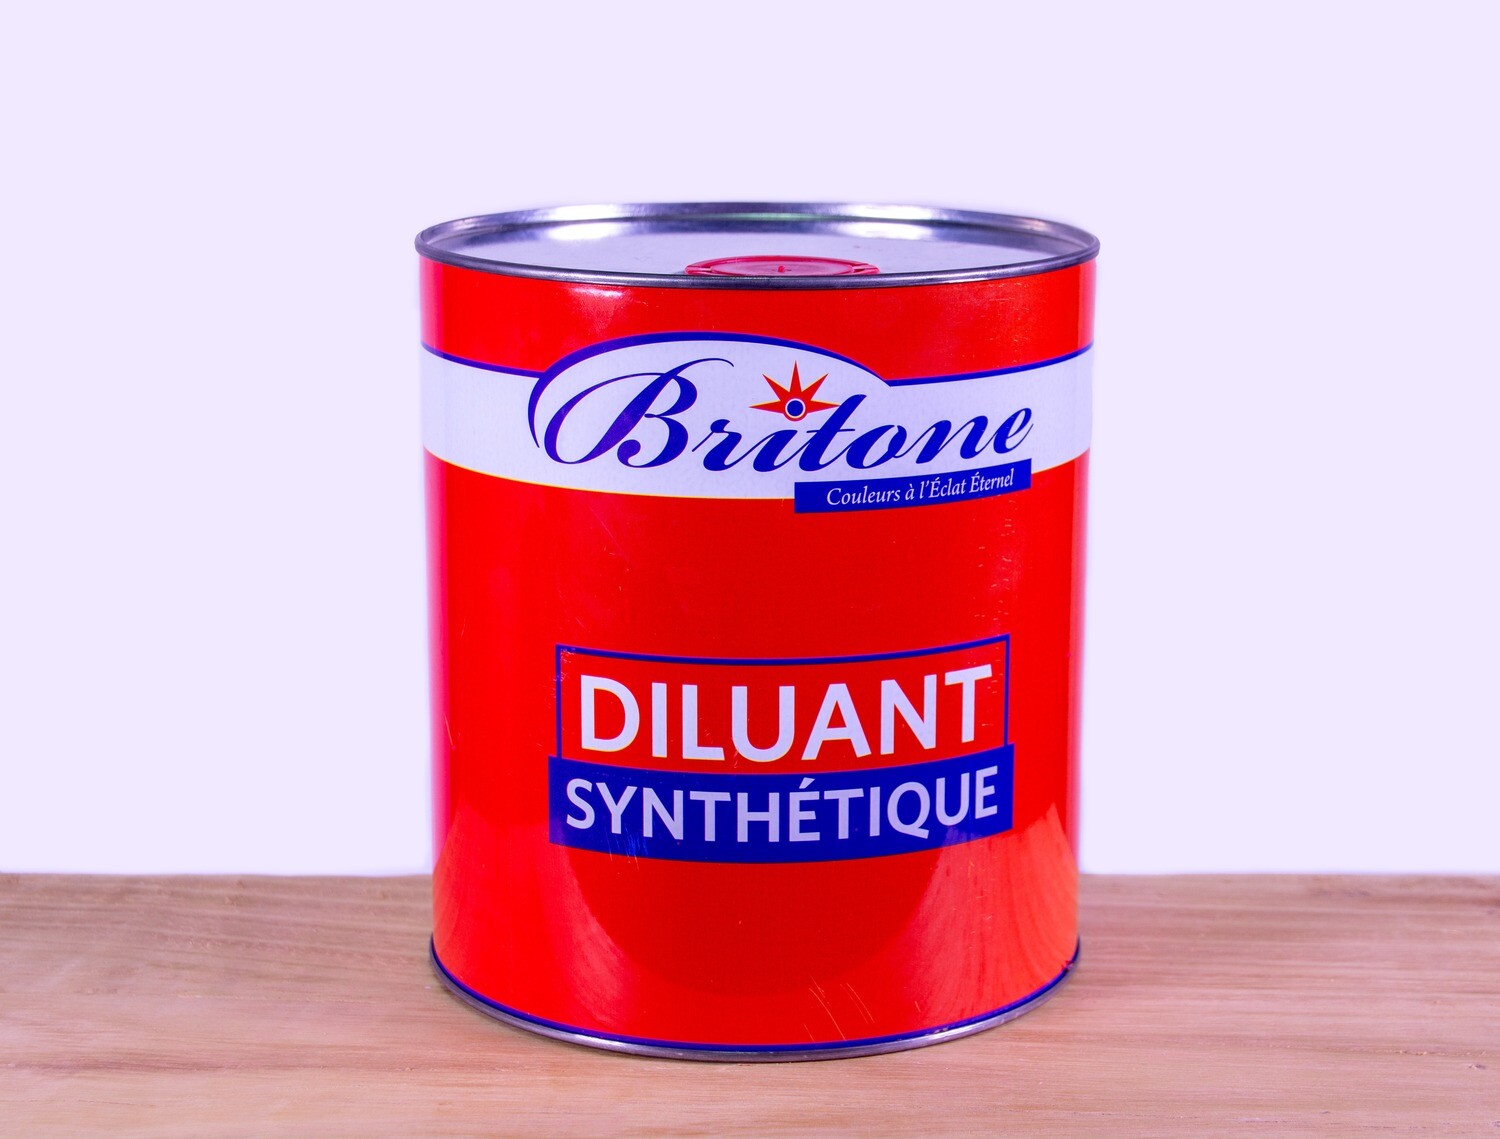 Diluant Synthétique